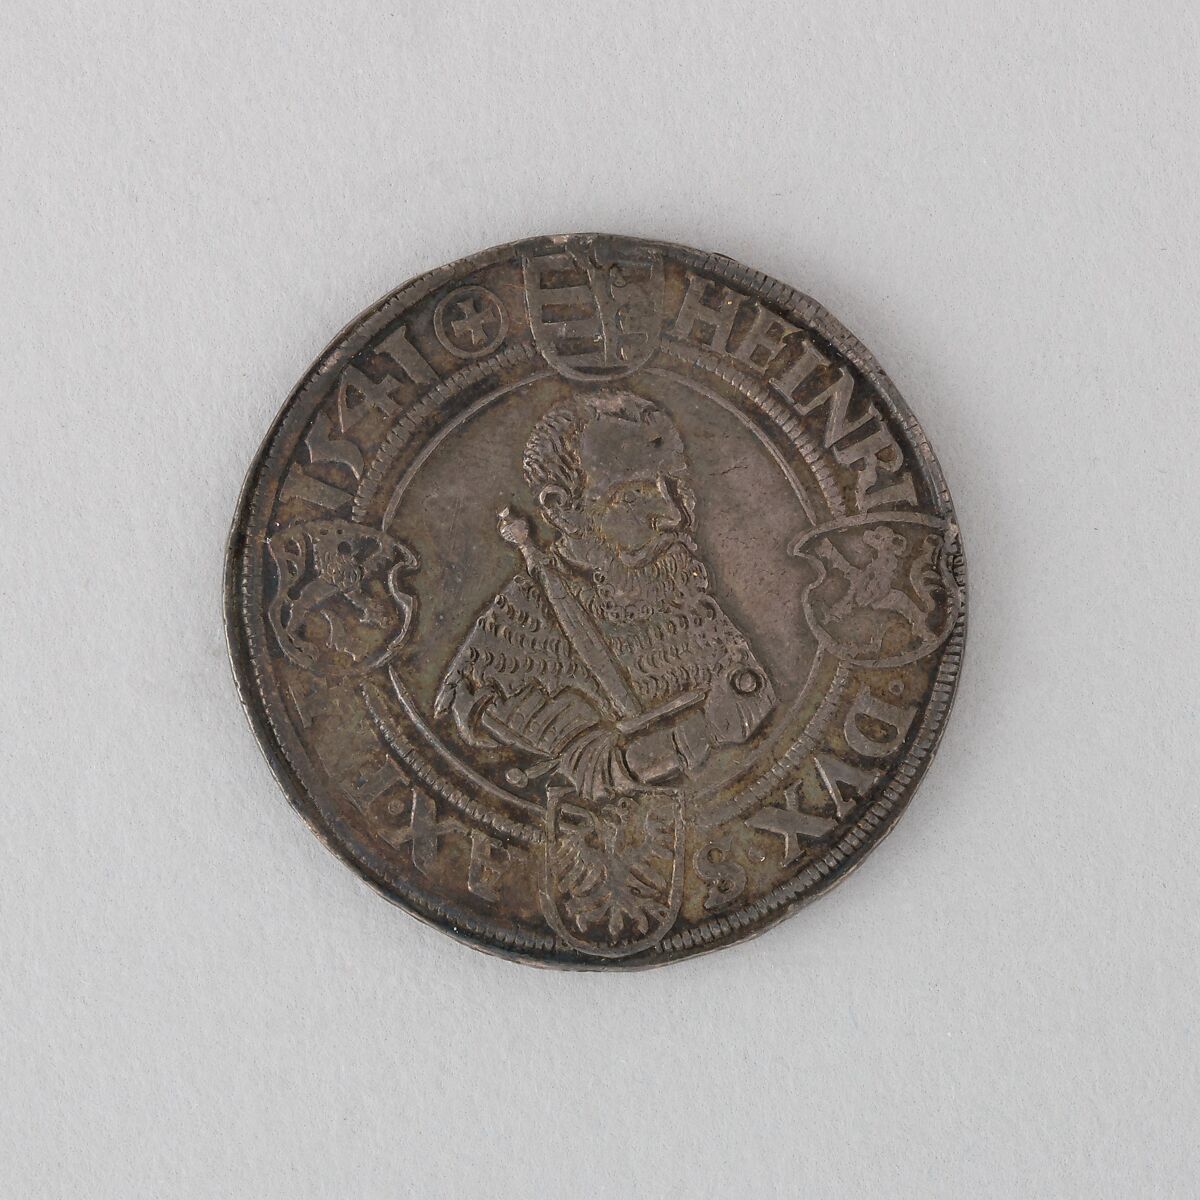 Coin (Thaler, Annaberg) Showing John Frederick, Elector of Saxony, Silver, German 